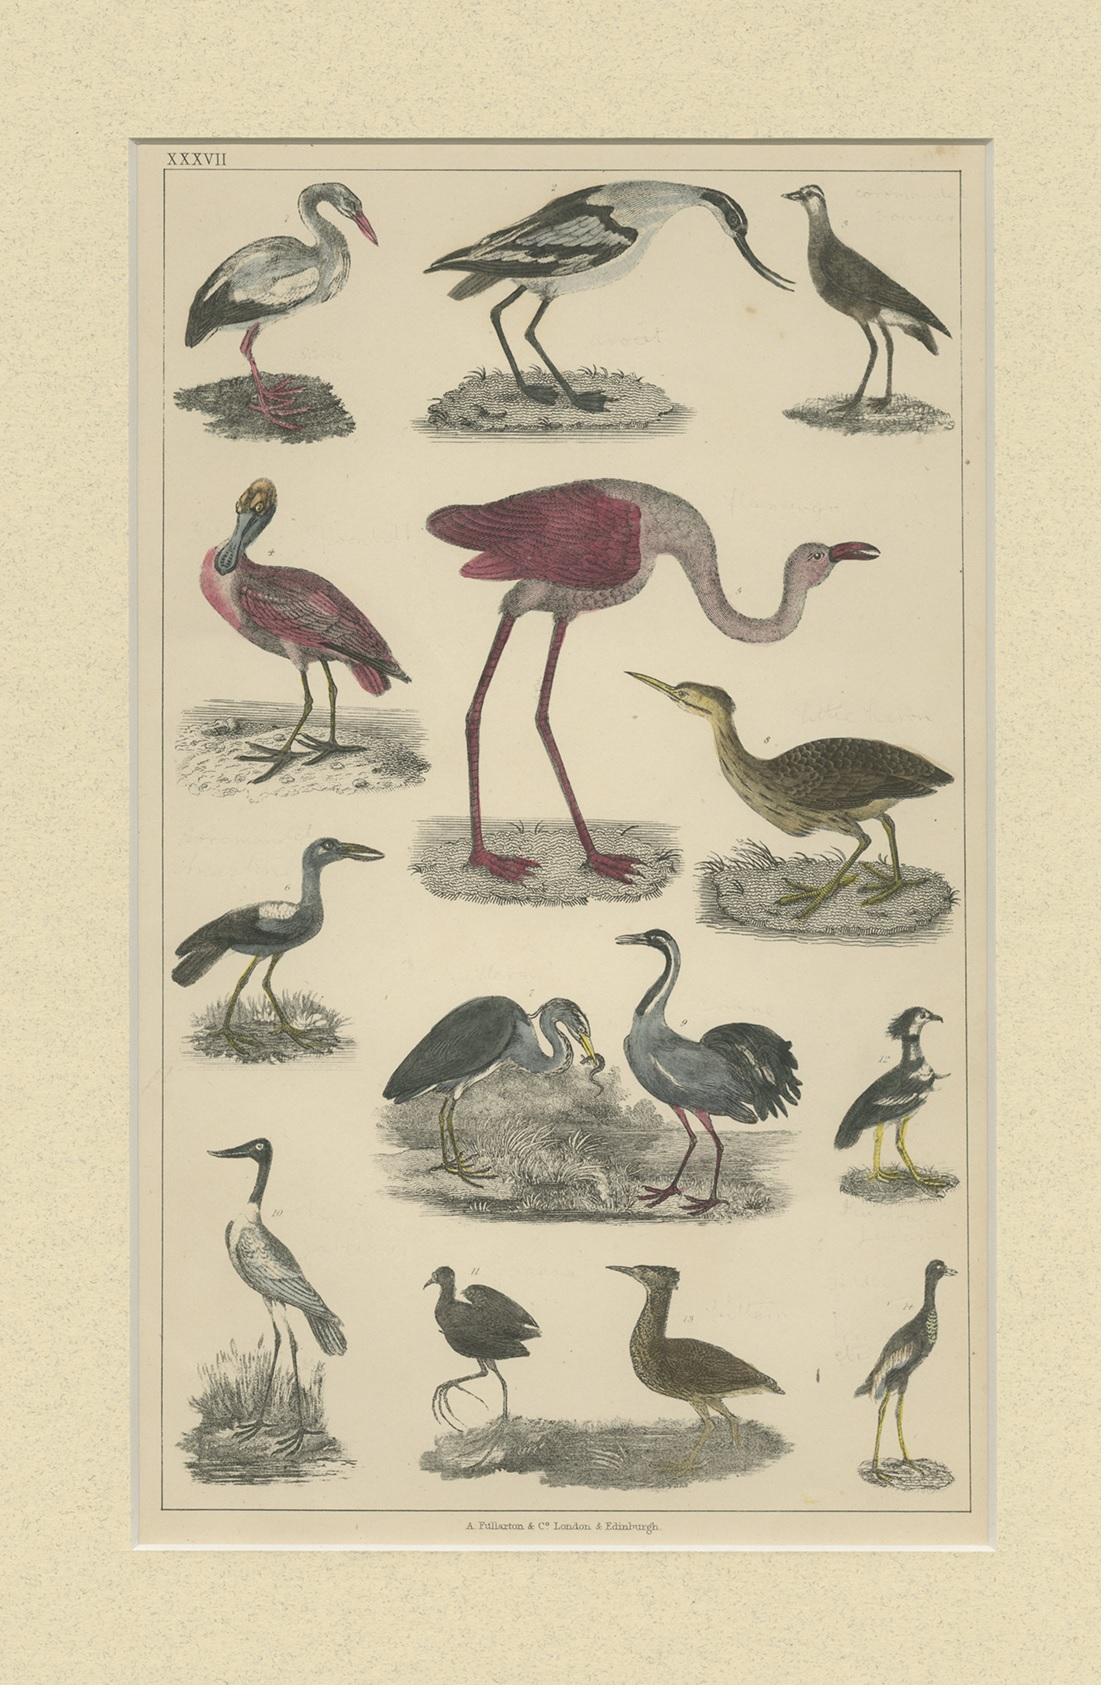 Untitled bird print featuring various bird species. This print originates from 'A History of the Earth and Animated Nature' by O. Goldsmith. Goldsmith's Animated Nature went through over twenty editions into the Victorian era and served as a popular